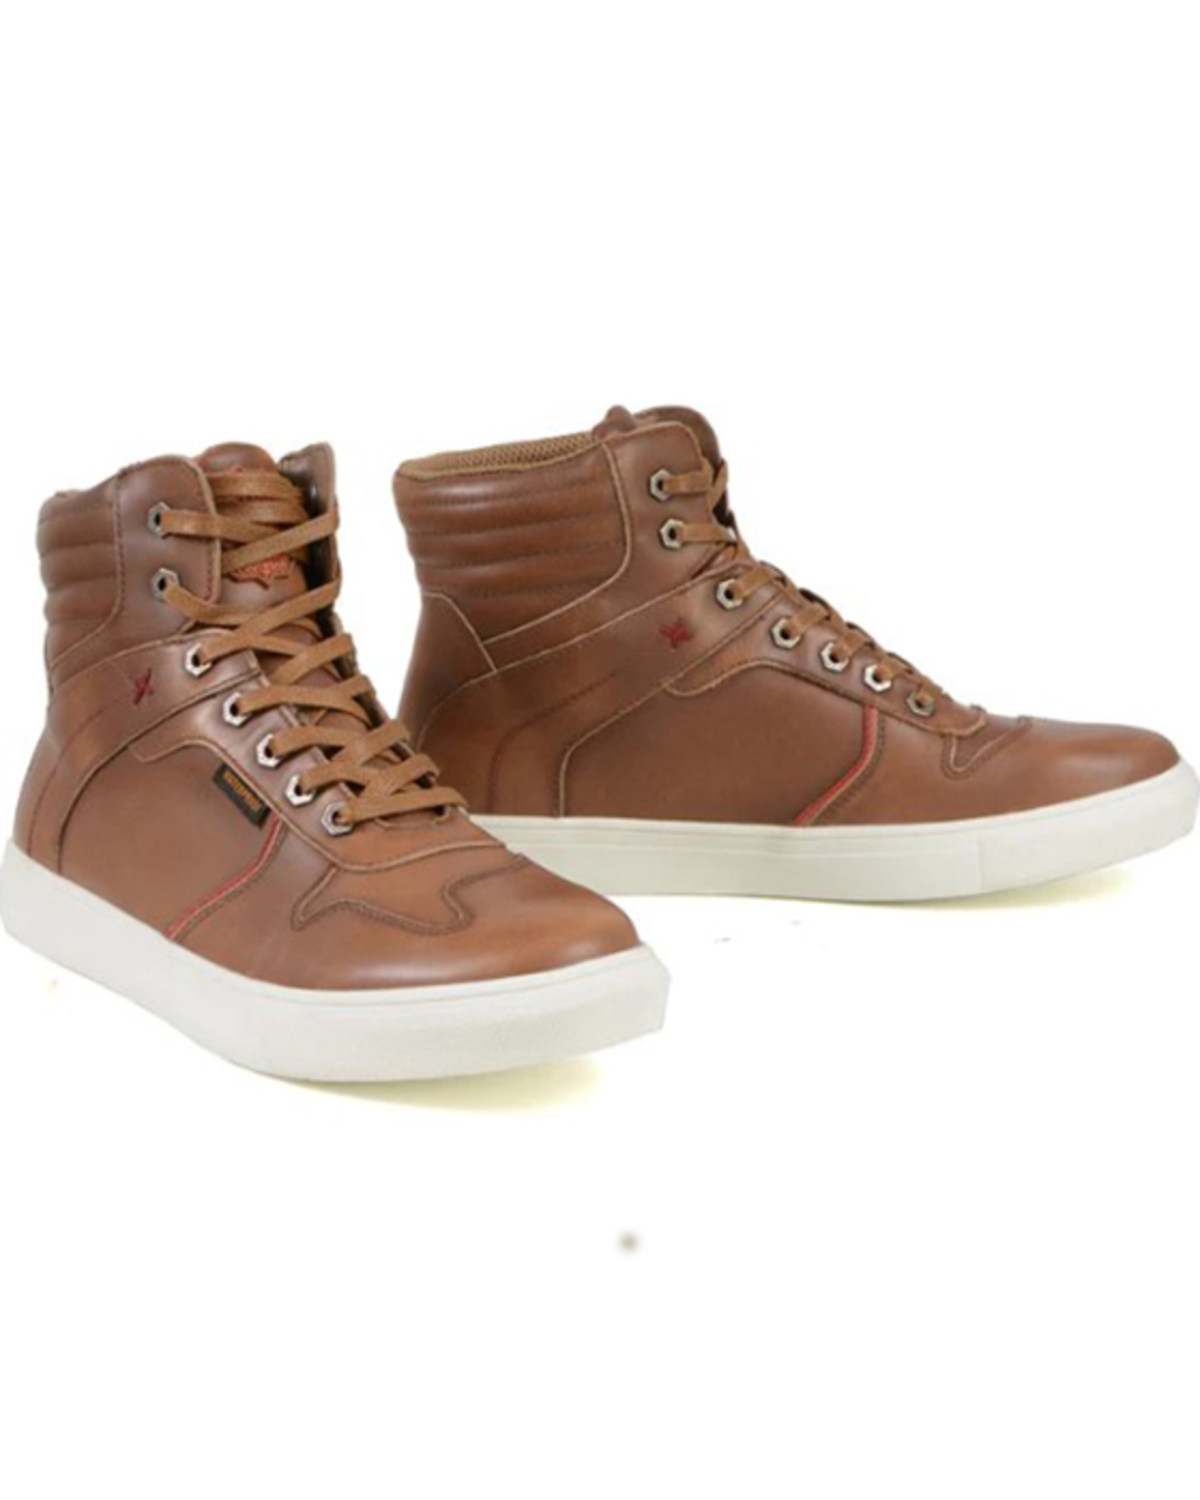 Milwaukee Leather Men's Vintage High-Top Reinforced Street Riding Waterproof Shoes